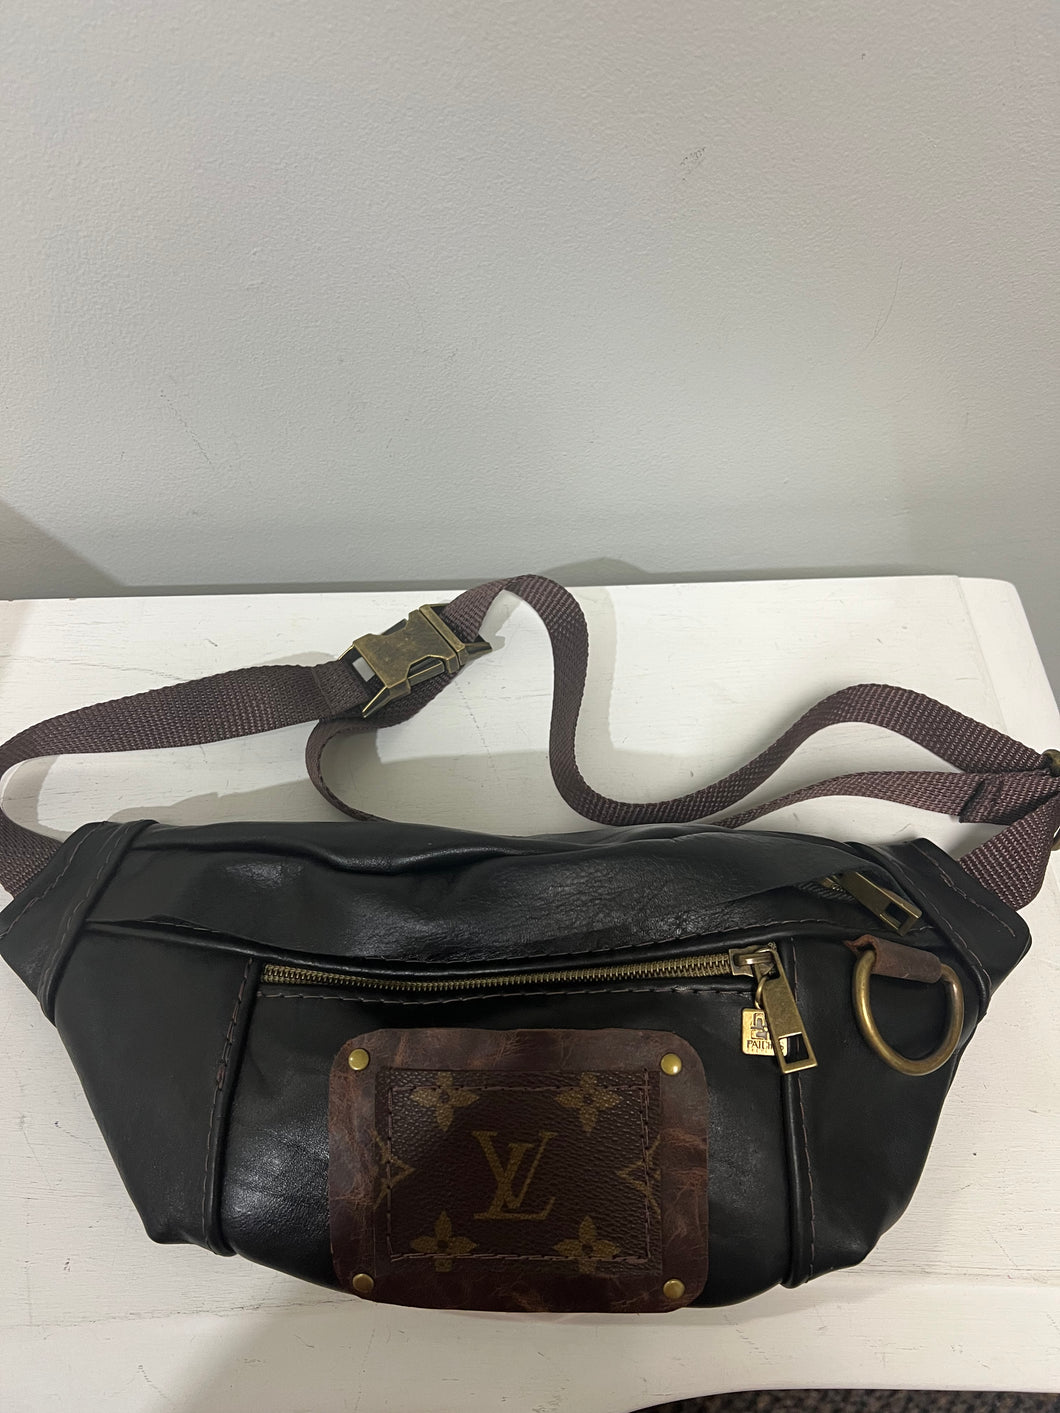 Shop Authentic Louis Vuitton Upcycled Products at Sissy Boutique